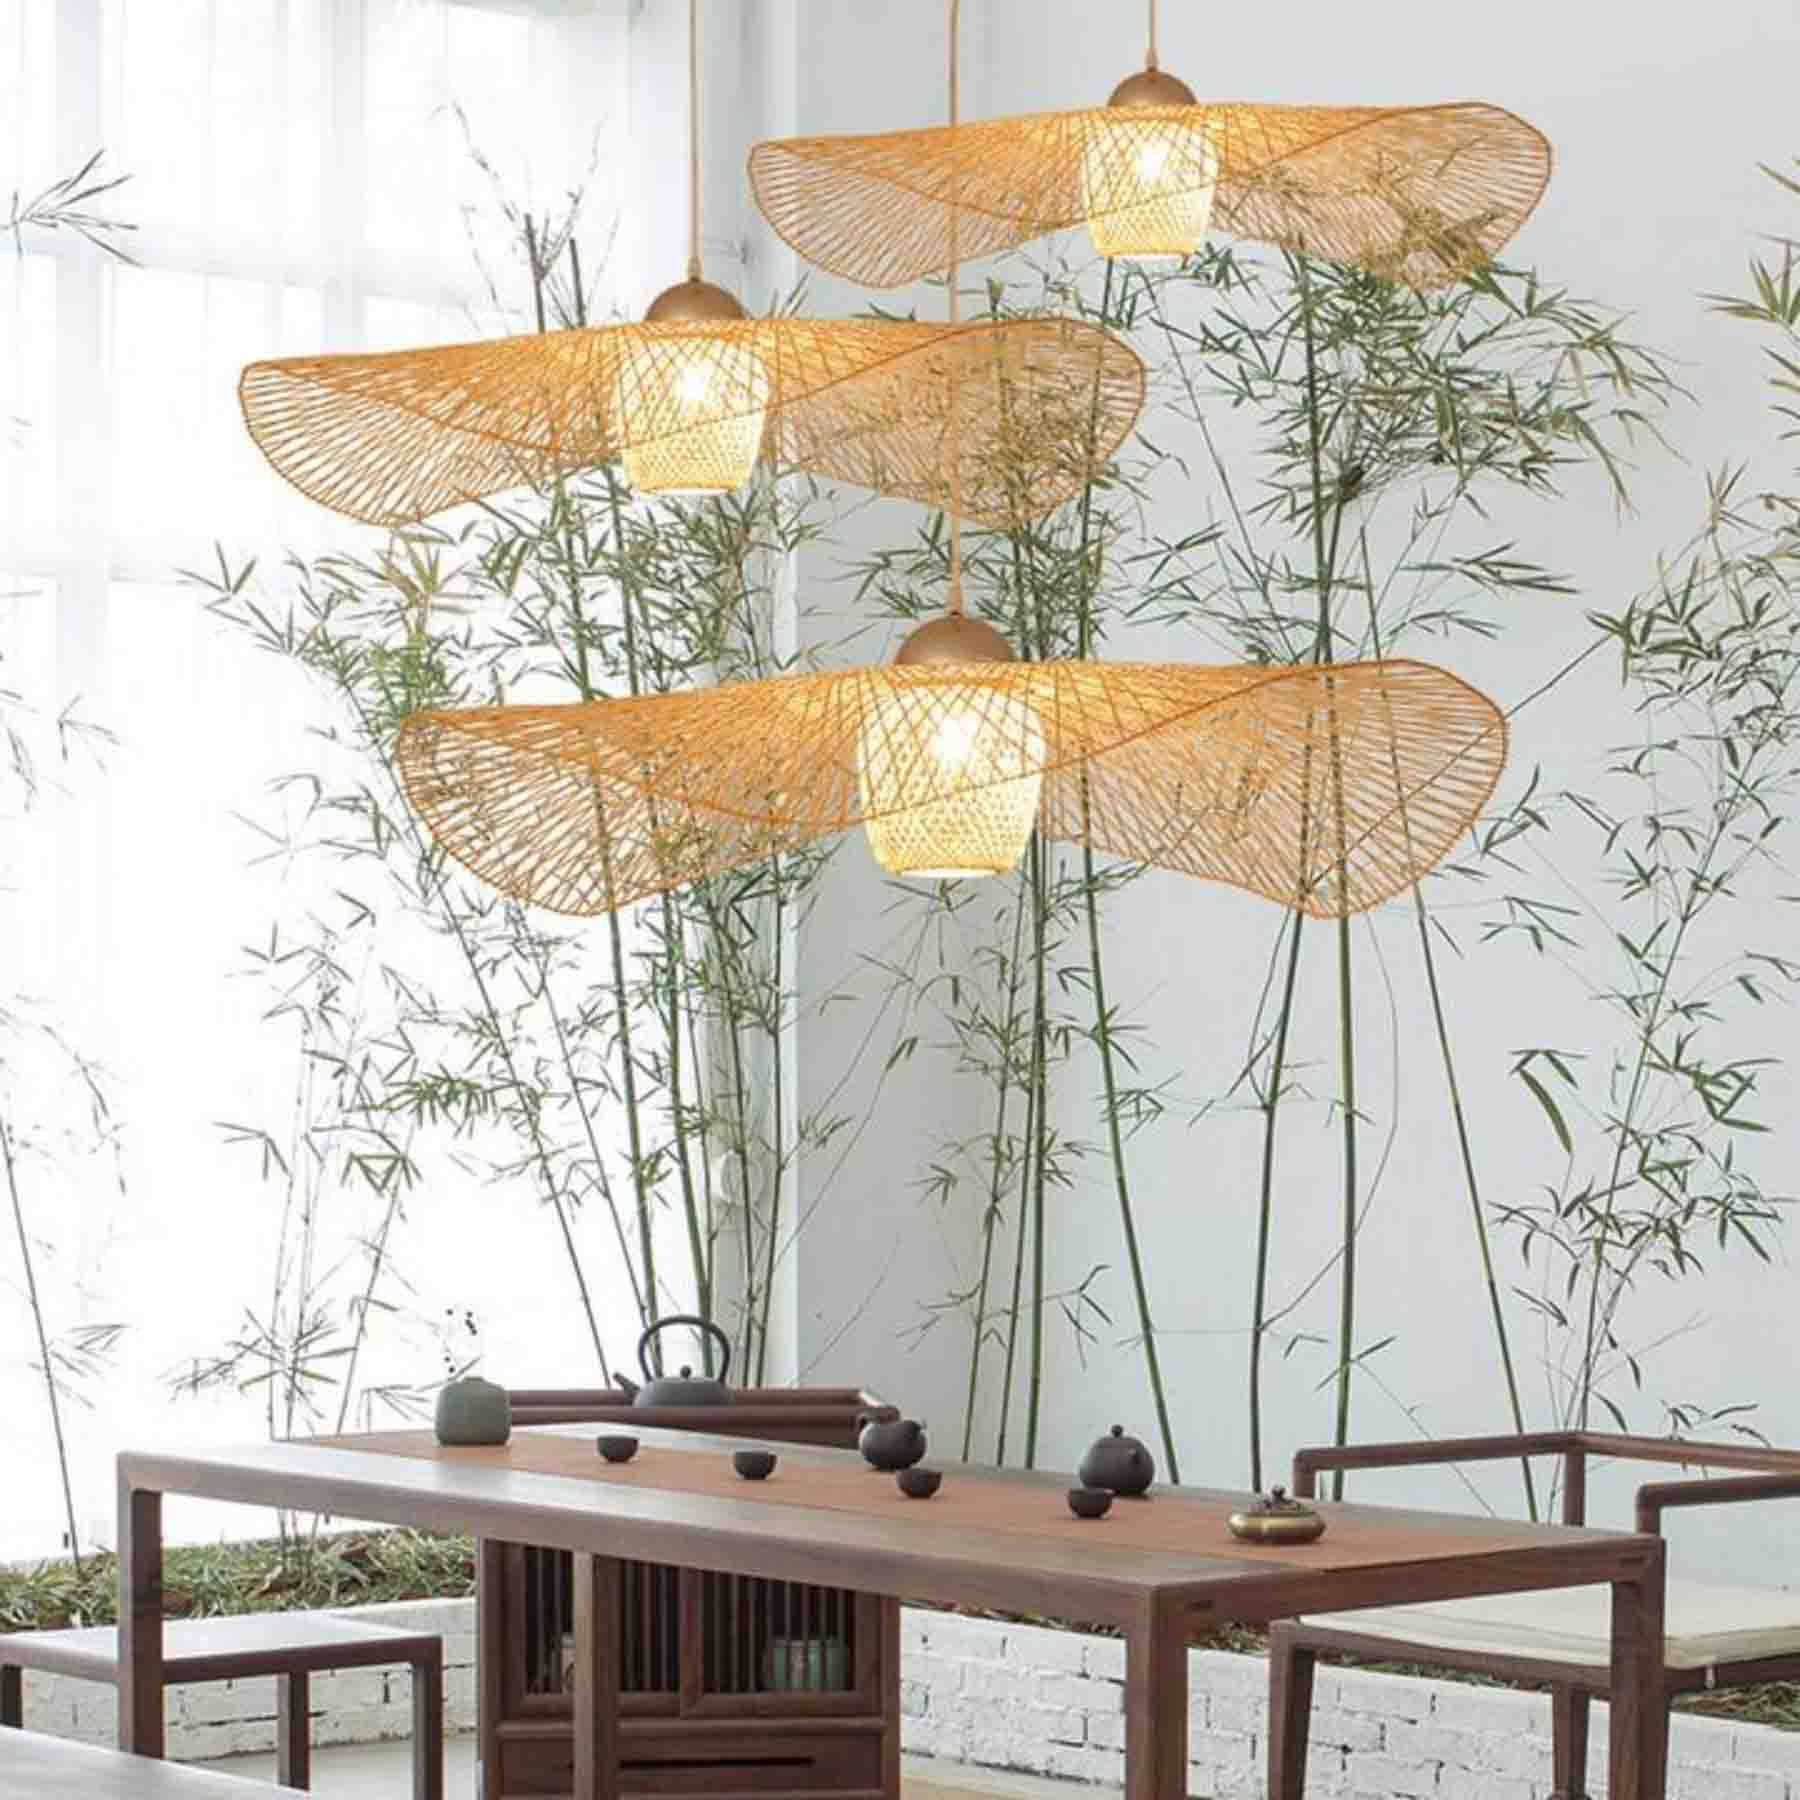 the bohemian rattan pendant lamp is the perfect design for those who want to infuse a space with a unique and lively atmosphere